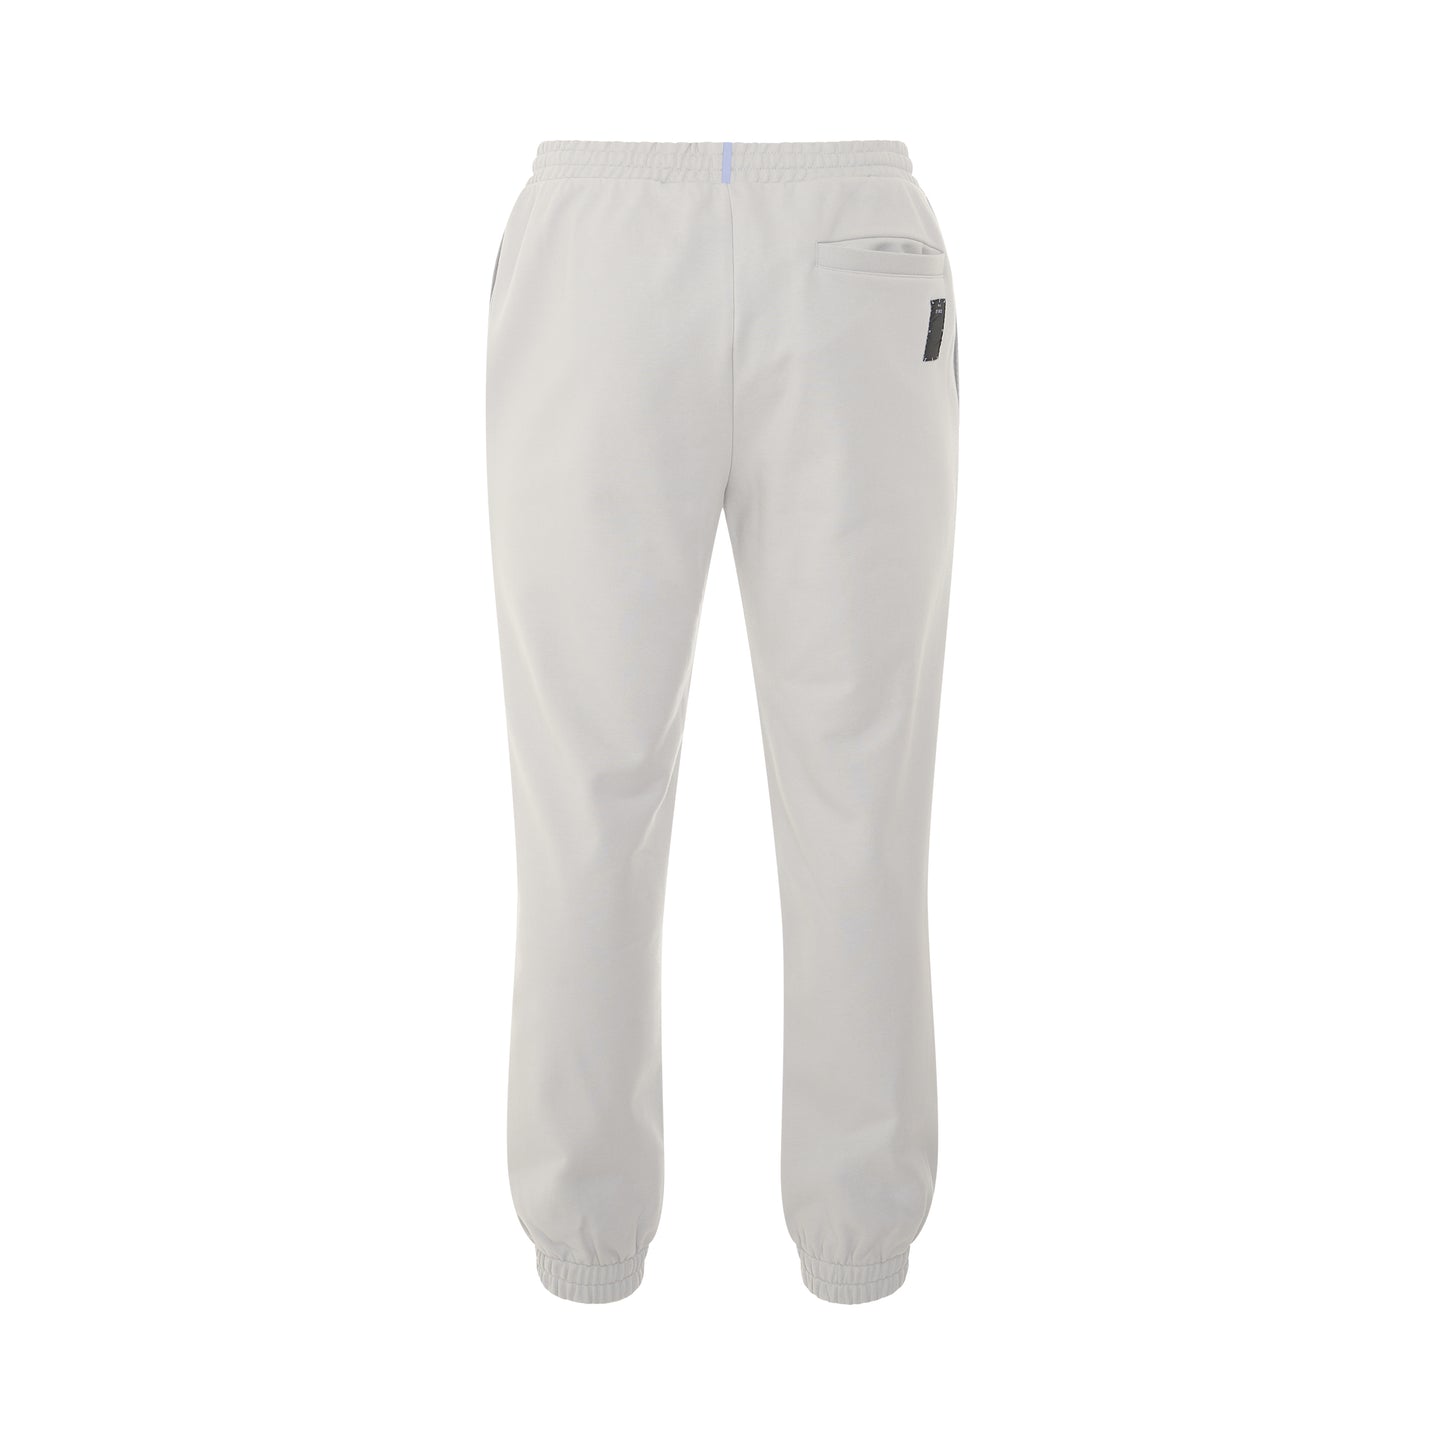 IC0 Sweatpants in Alloy